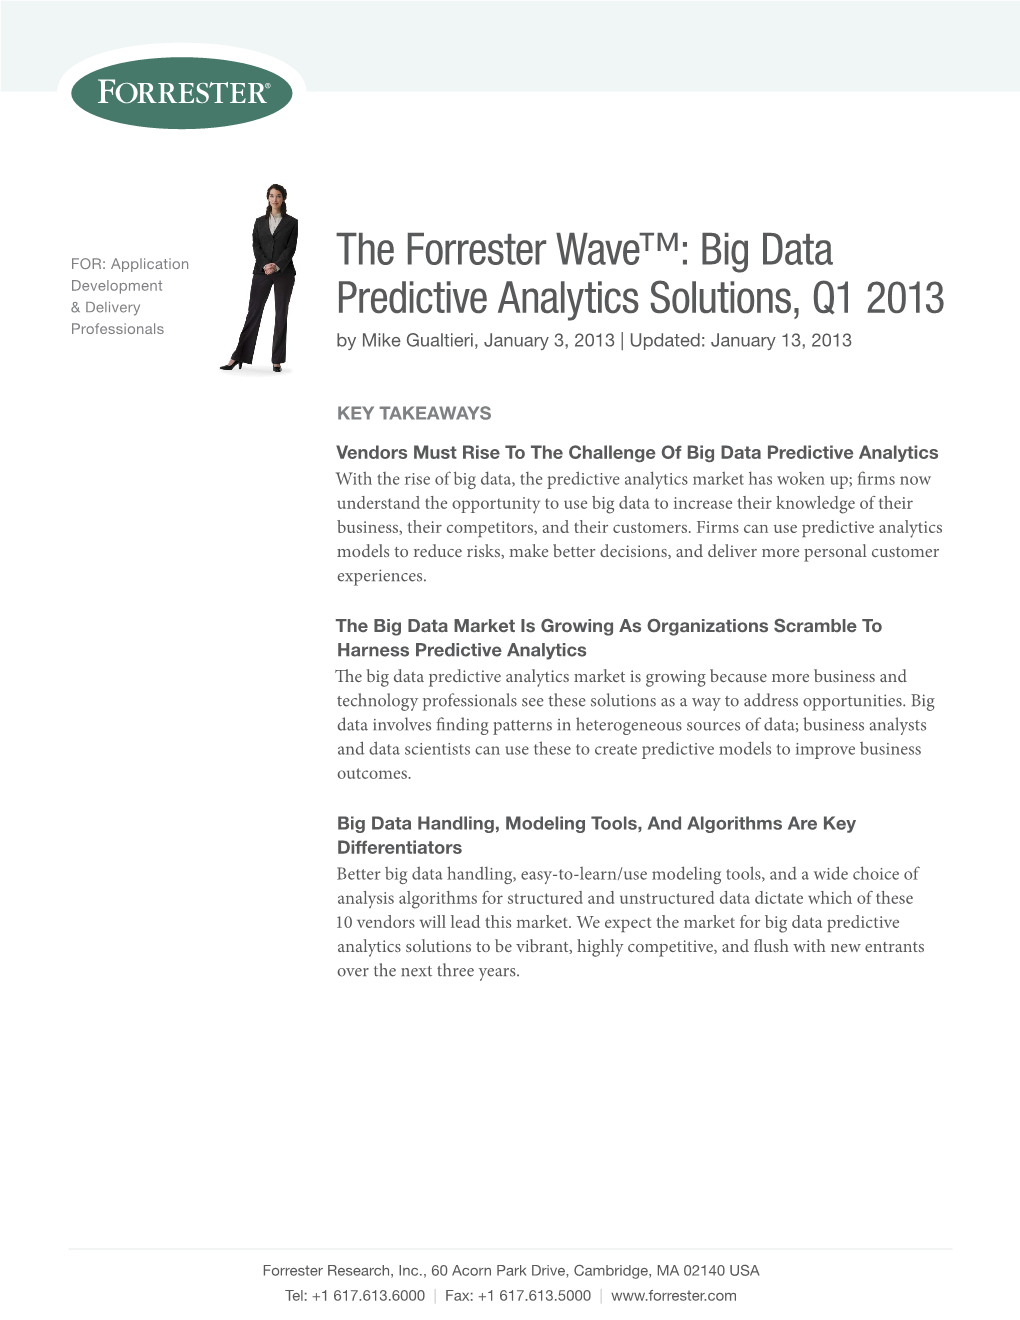 The Forrester Wave™: Big Data Predictive Analytics Solutions, Q1 2013 by Mike Gualtieri with Stephen Powers and Vivian Brown